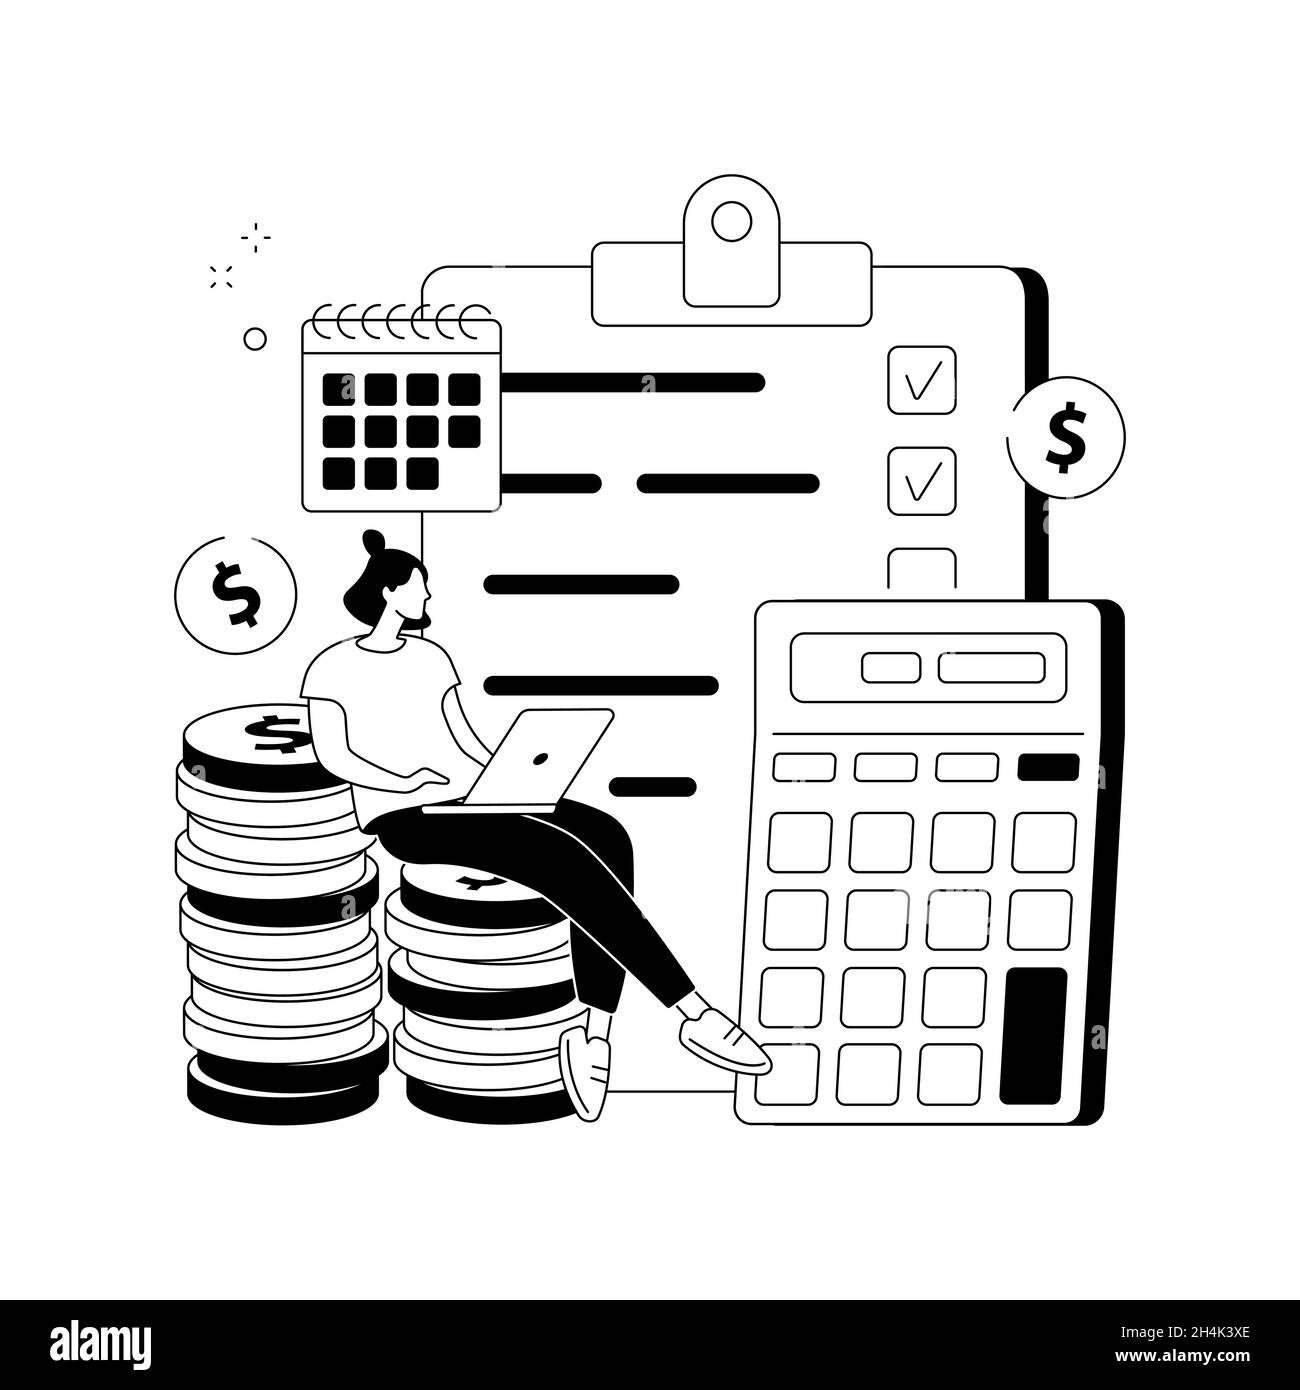 Budget planning abstract concept vector illustration. Stock Vector